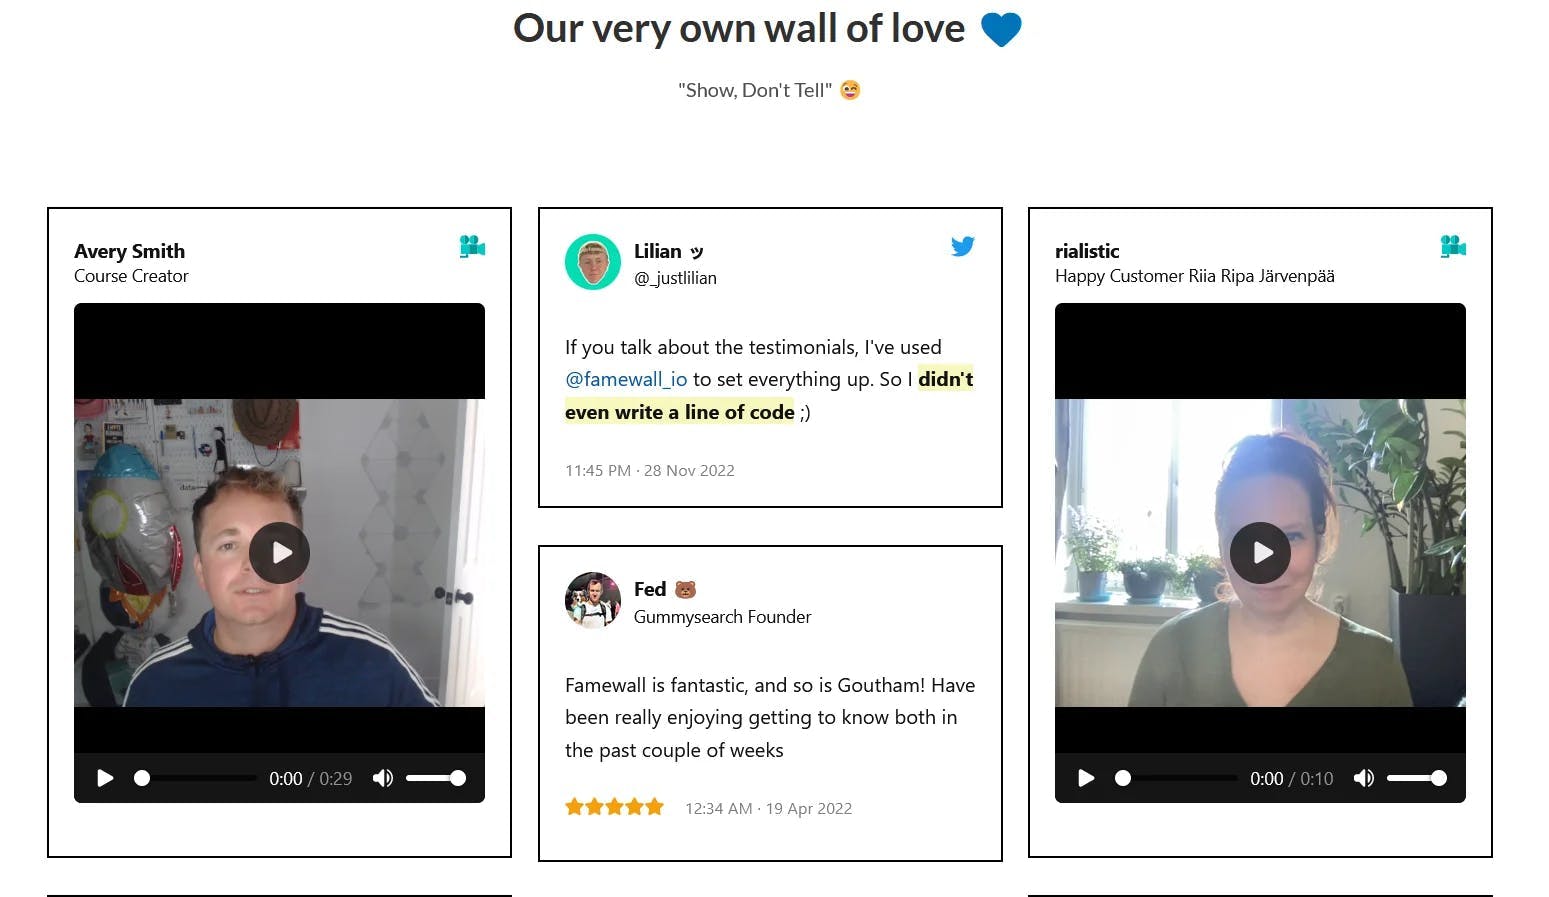 Famewall's Wall of Love on the website